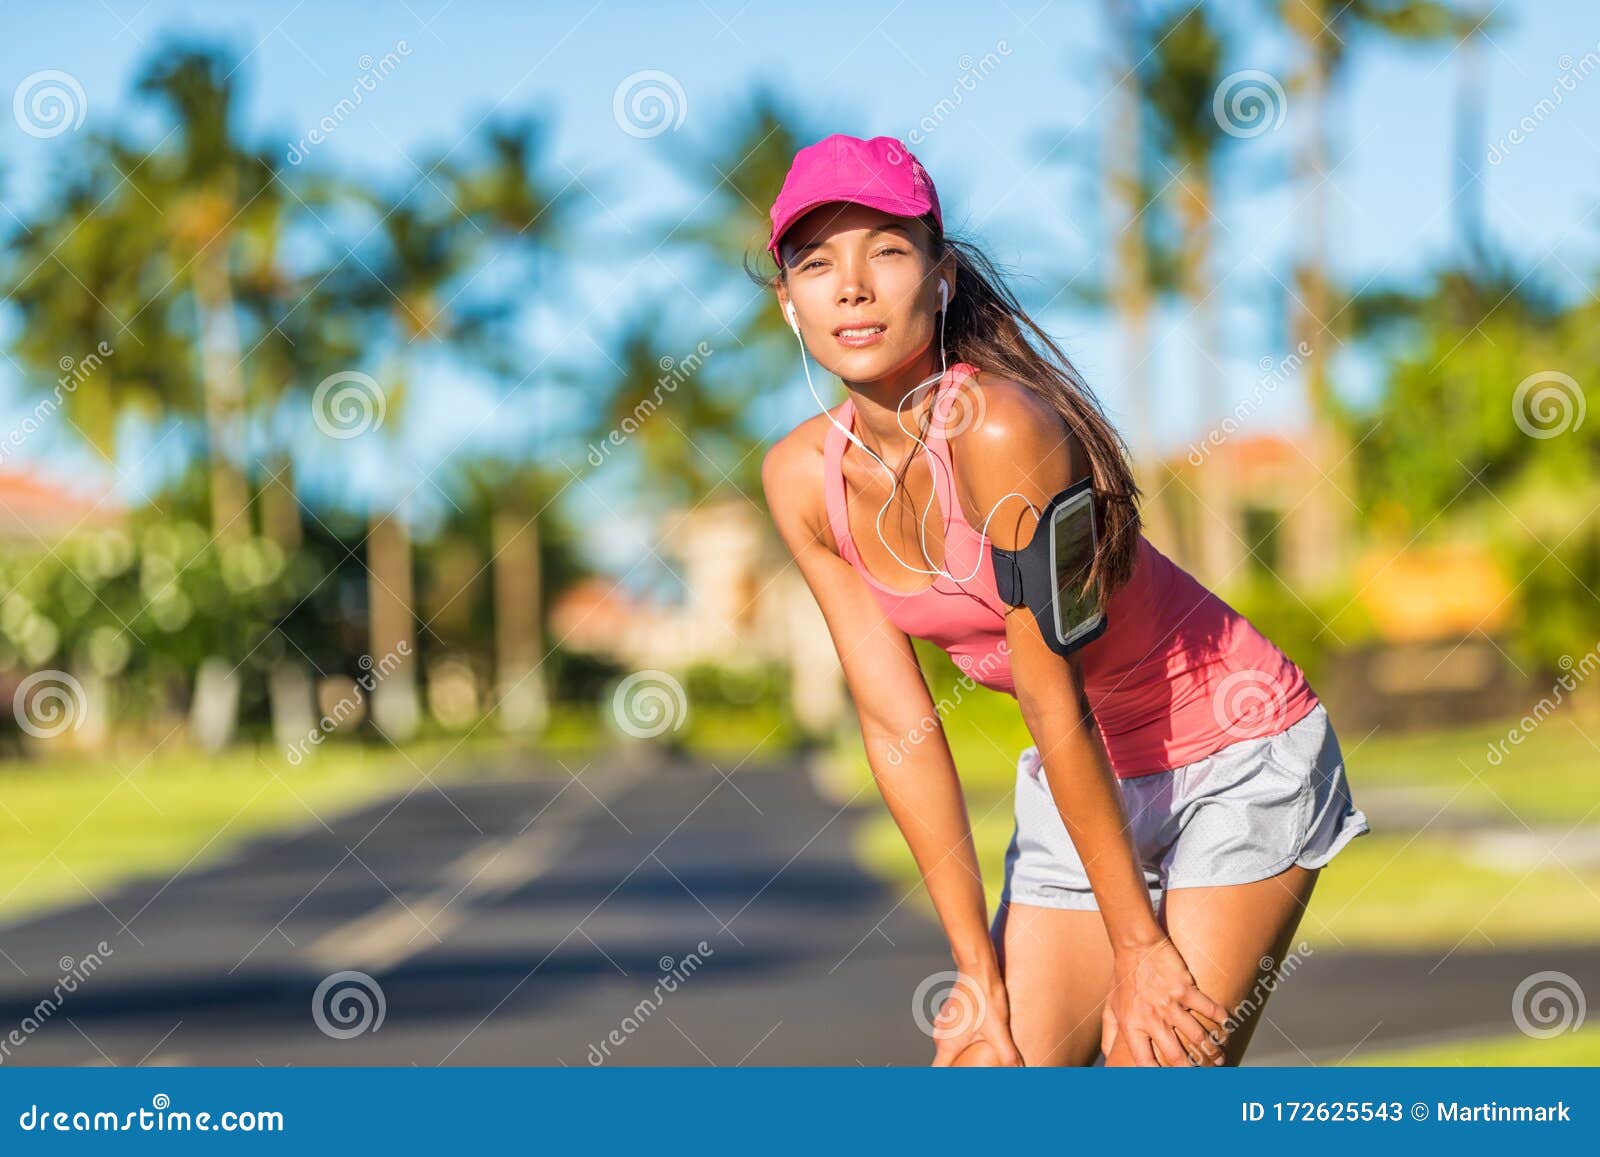 Tired Runner Woman Ready For Running Wearing Sports Cap ...